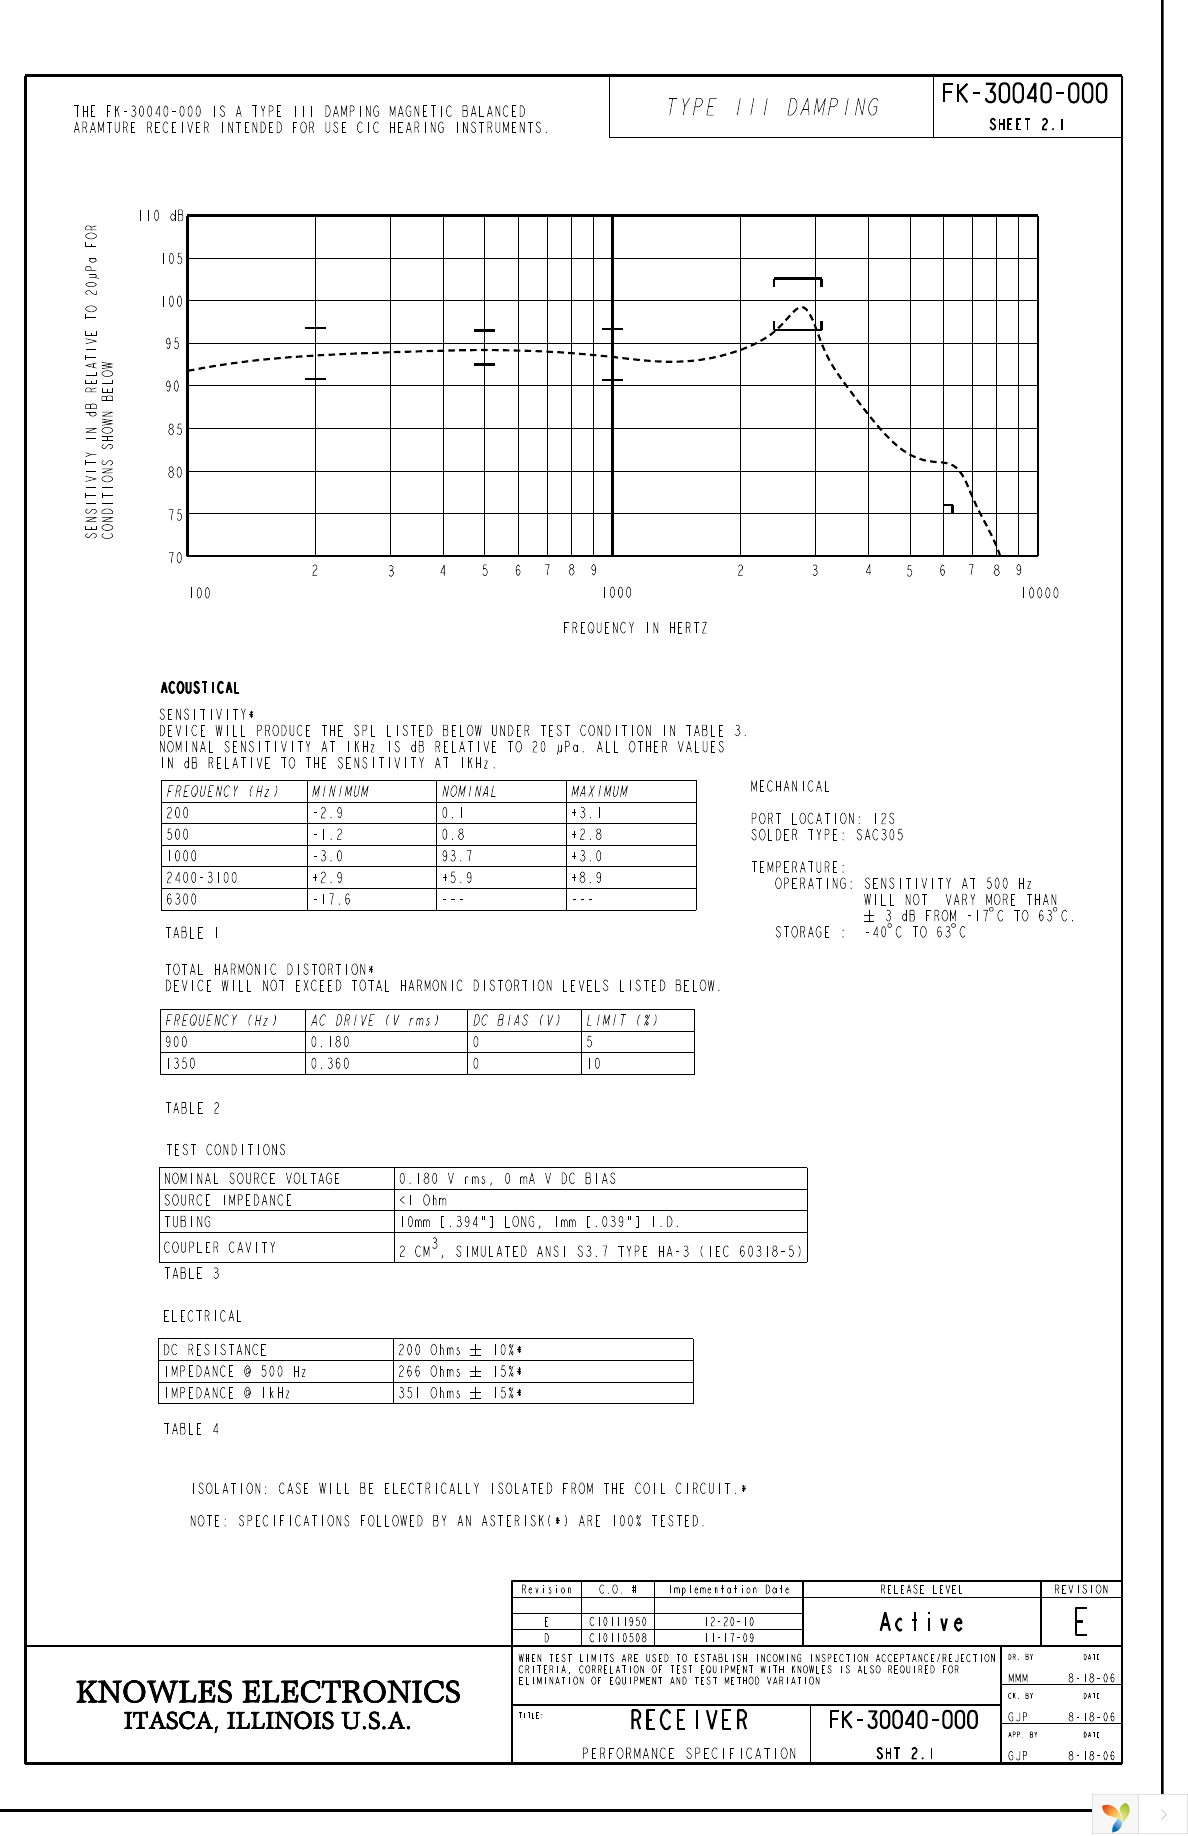 FK-30040-000 Page 2